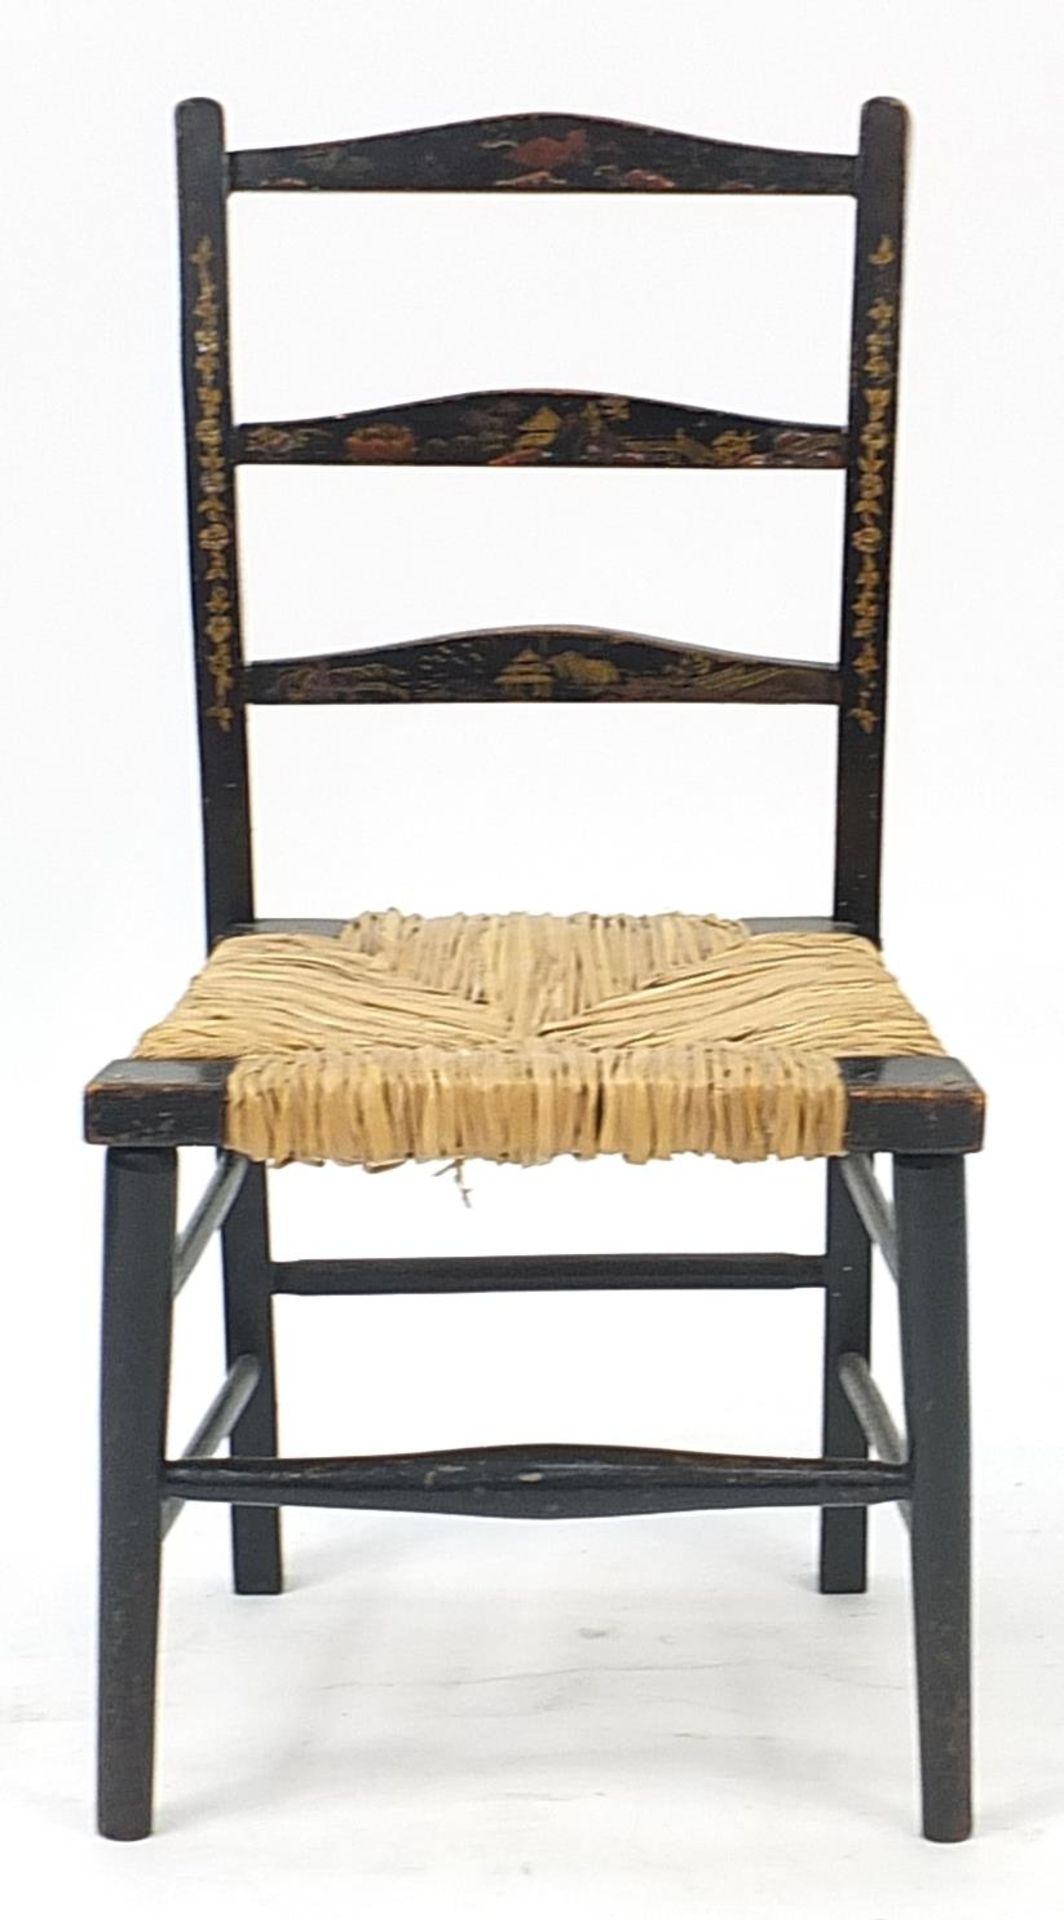 Black lacquered chinoiserie child's chair with wicker seat, 63cm high - Image 2 of 4